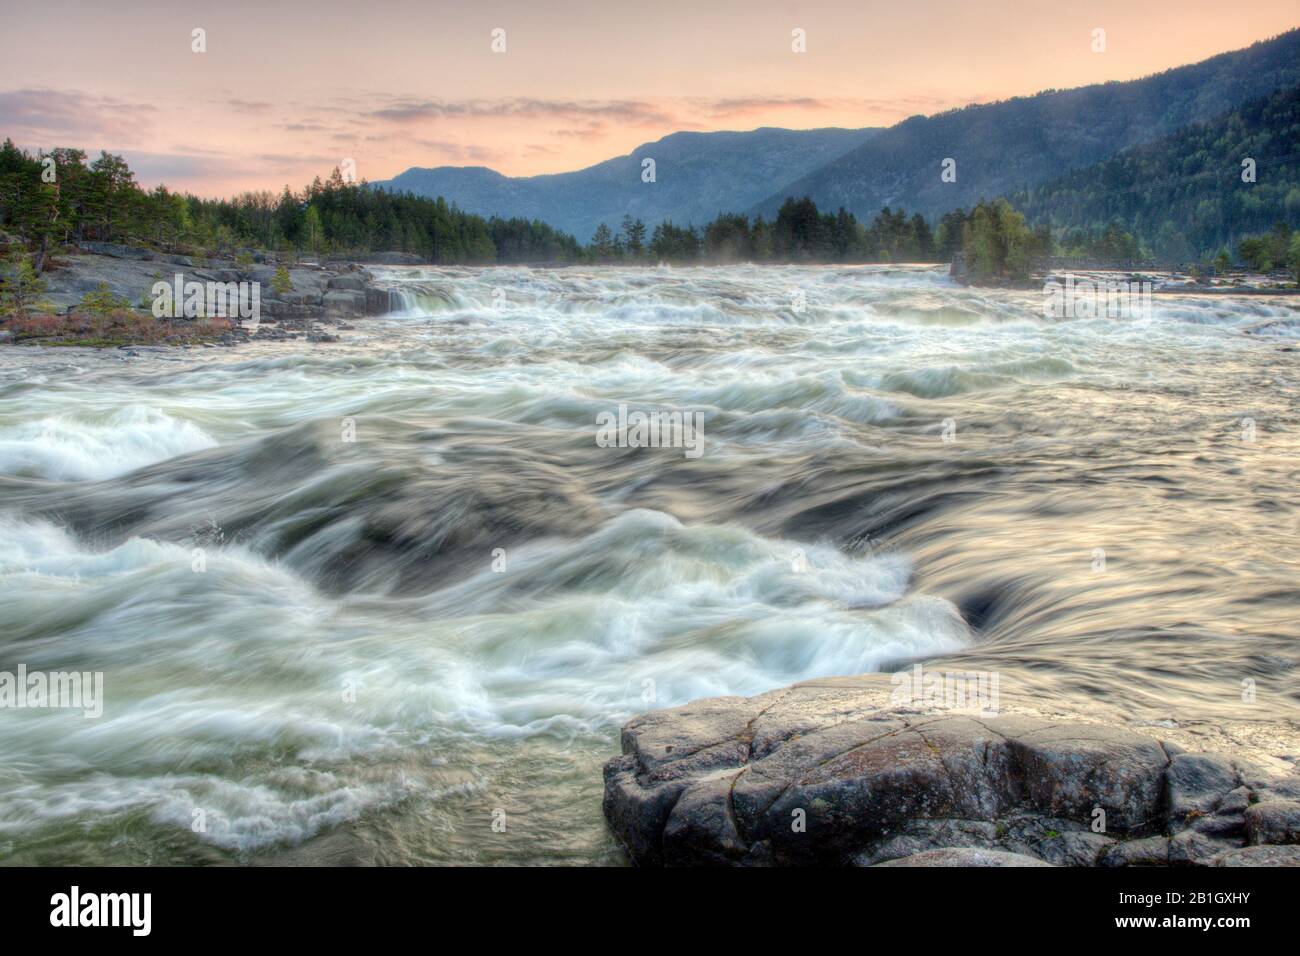 rapids of the Otrarivier at sunset, Norway, Evje Stock Photo